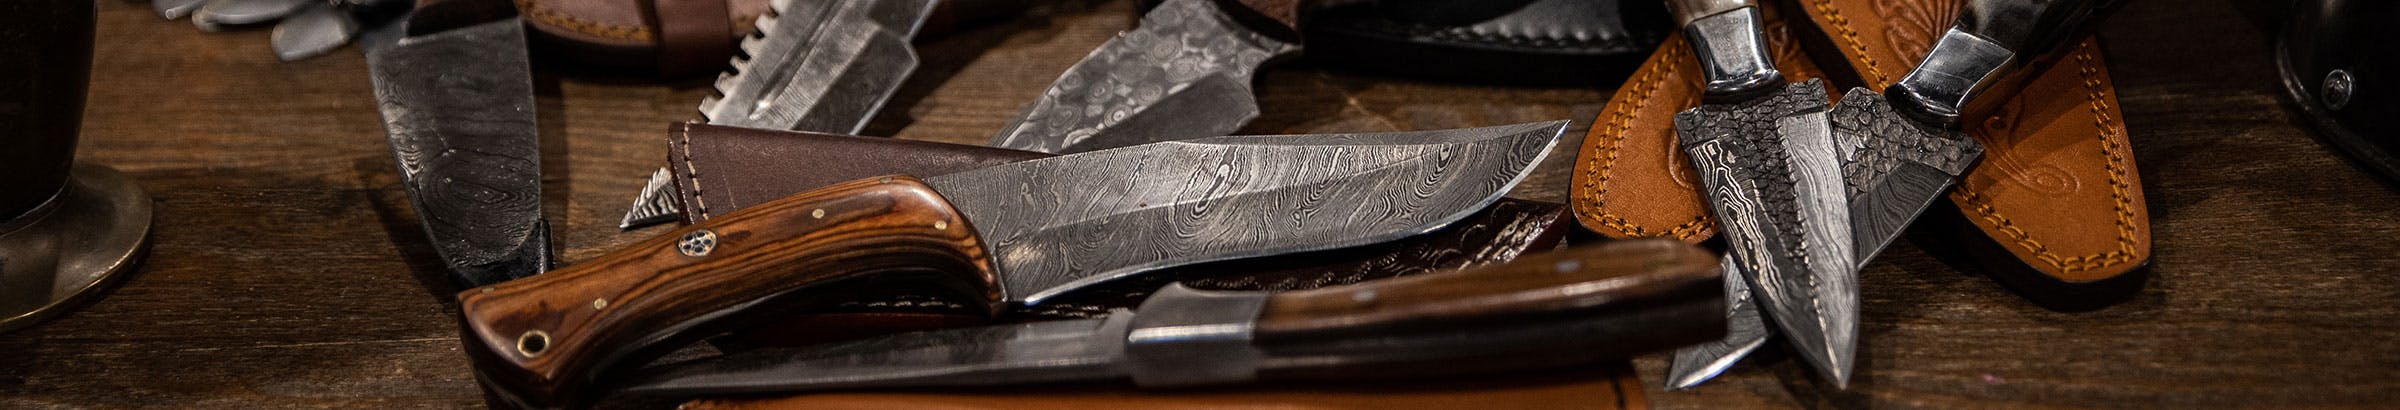 ANUBIS - HAND MADE DAMASCUS STEEL KNIFE by Forseti Steel